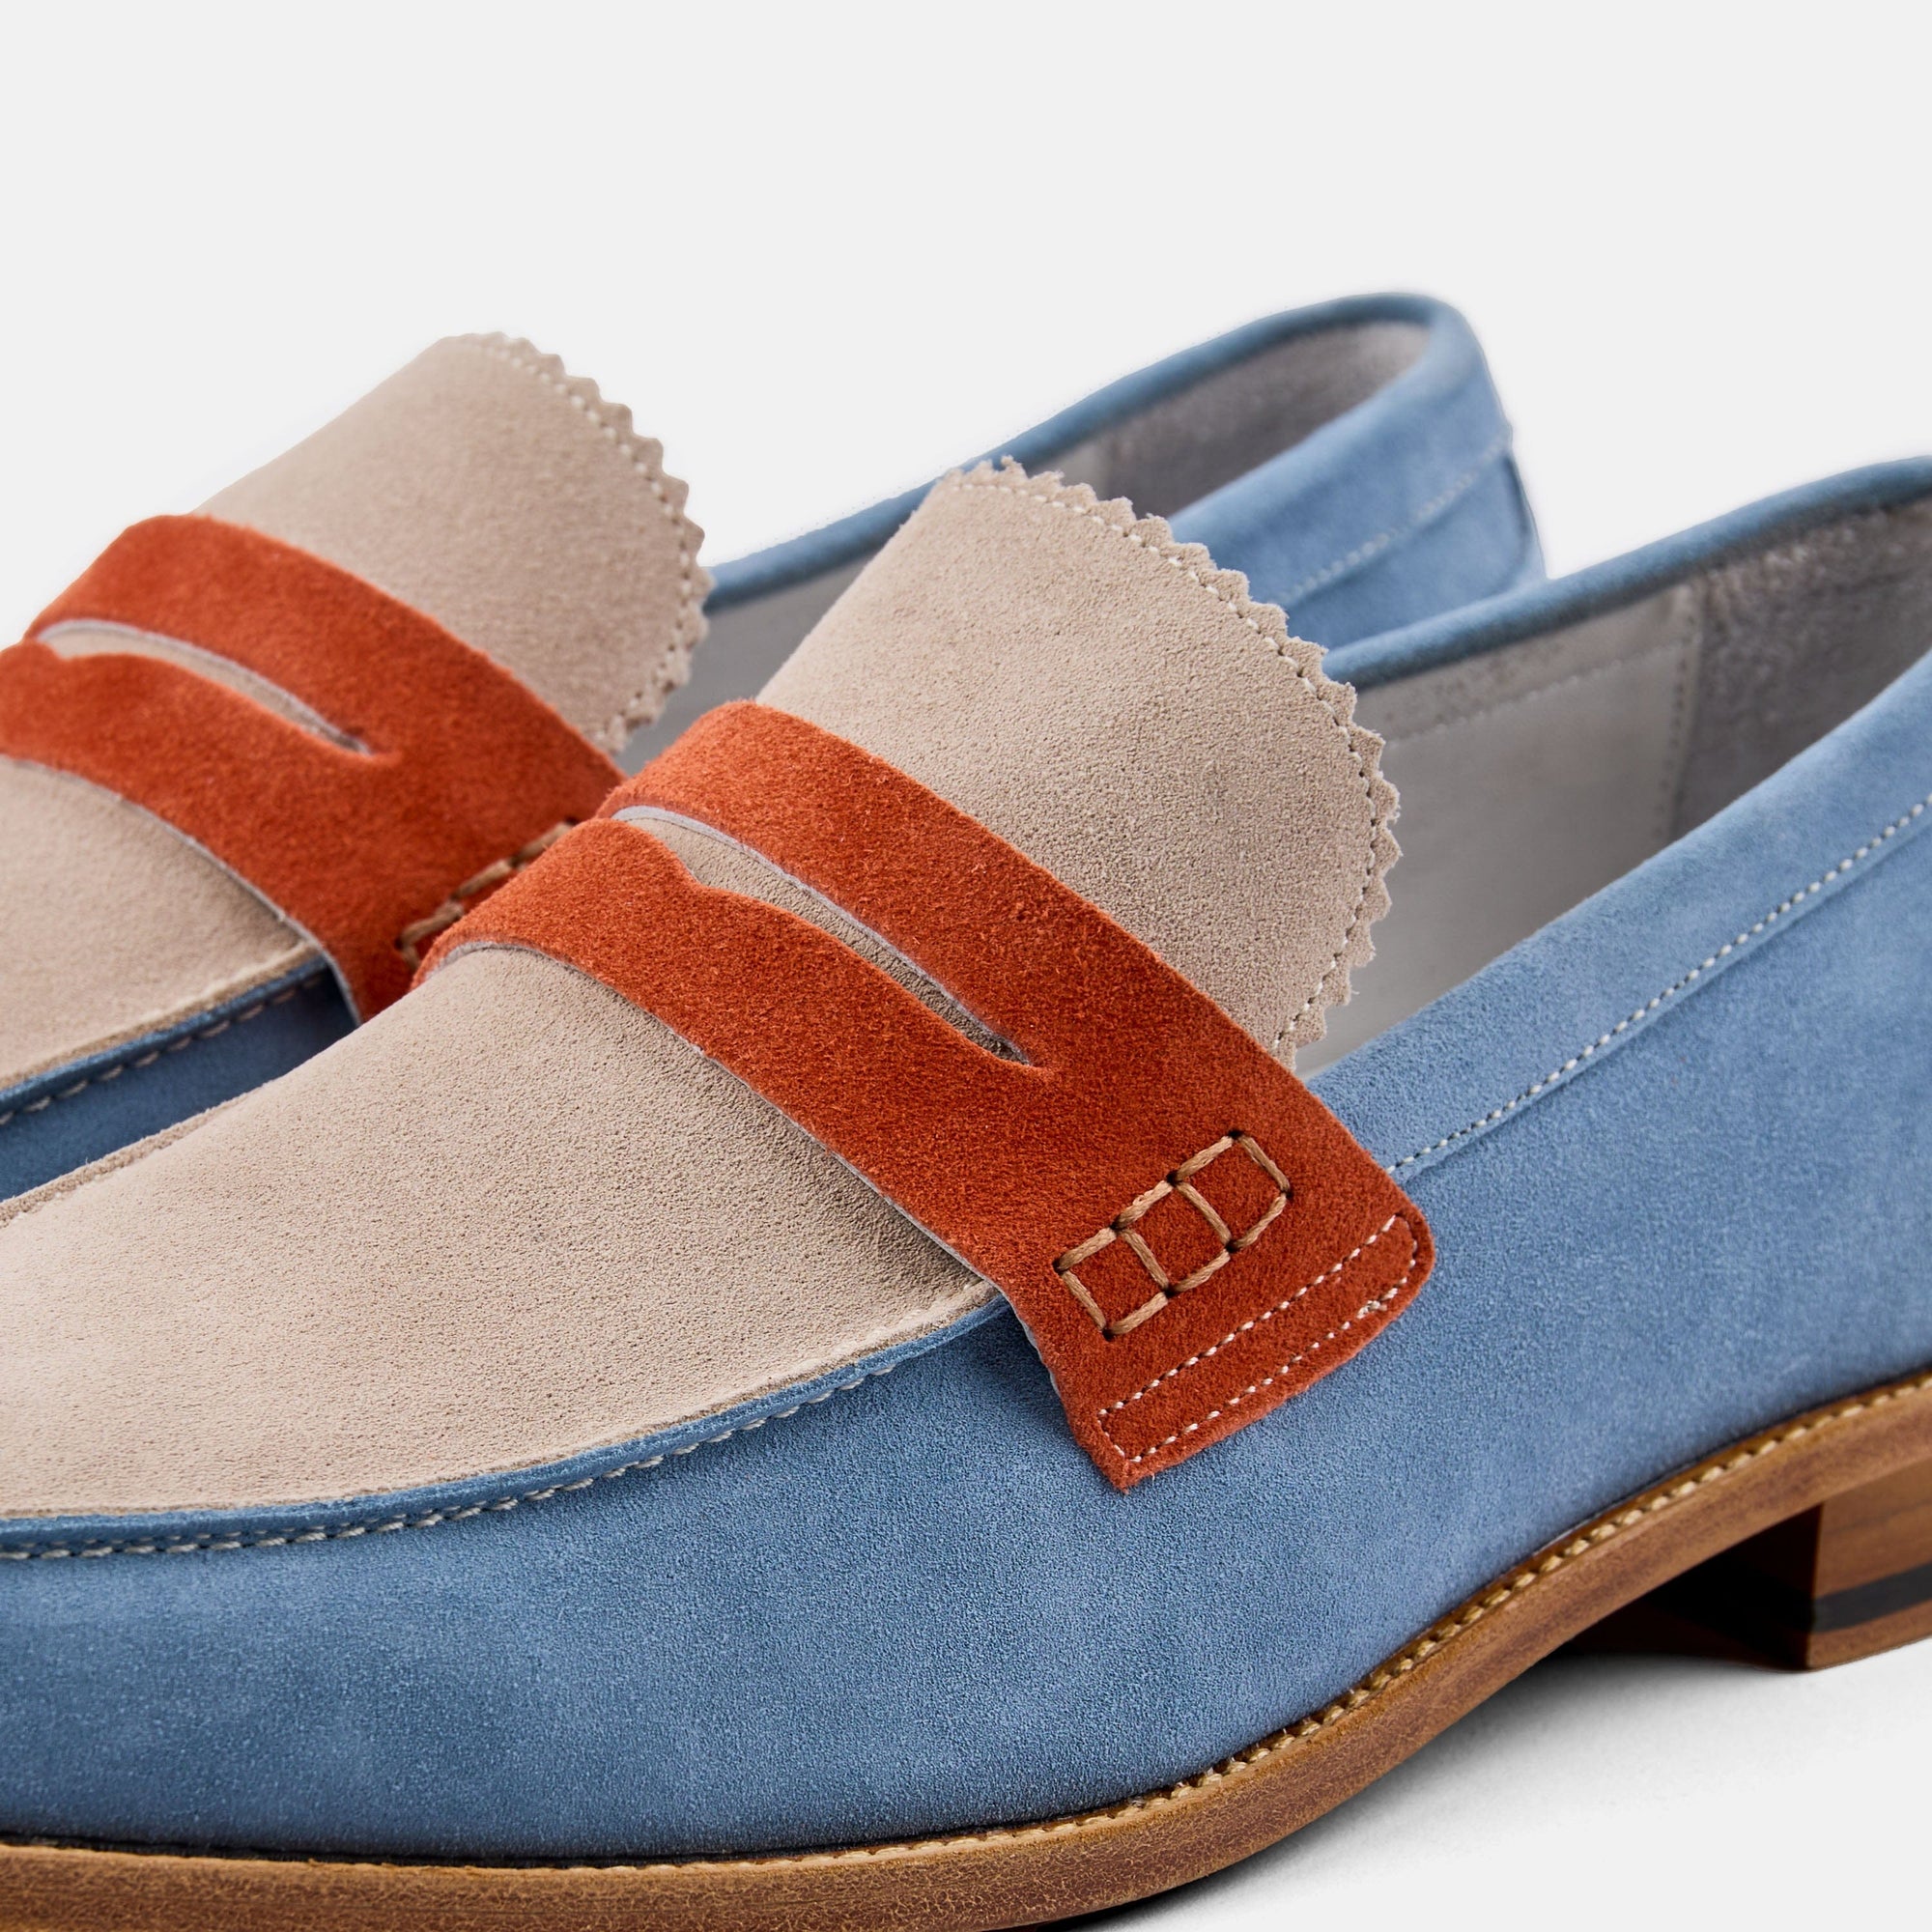 Abe Blue Skies Suede Penny Loafers